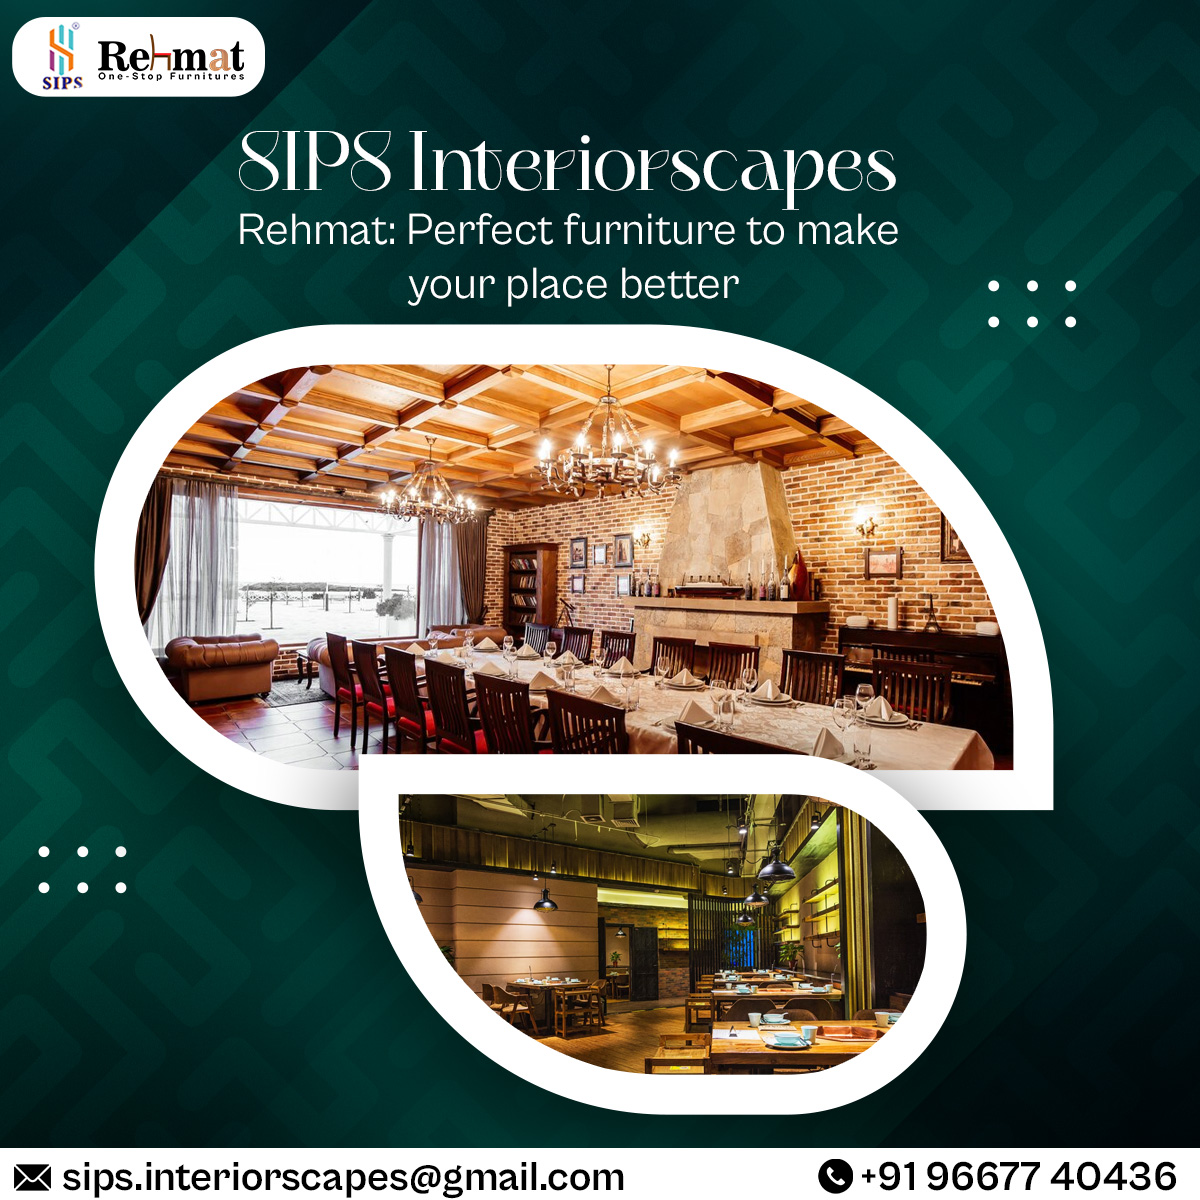 SIPS Interiorscapes
Rehmat: Perfect furniture to make your place better
🌐 sips.interiorscapes@gmail.com
📞+9196677 40436
#hospitalfurniture #italianfurniture #importedfurniture